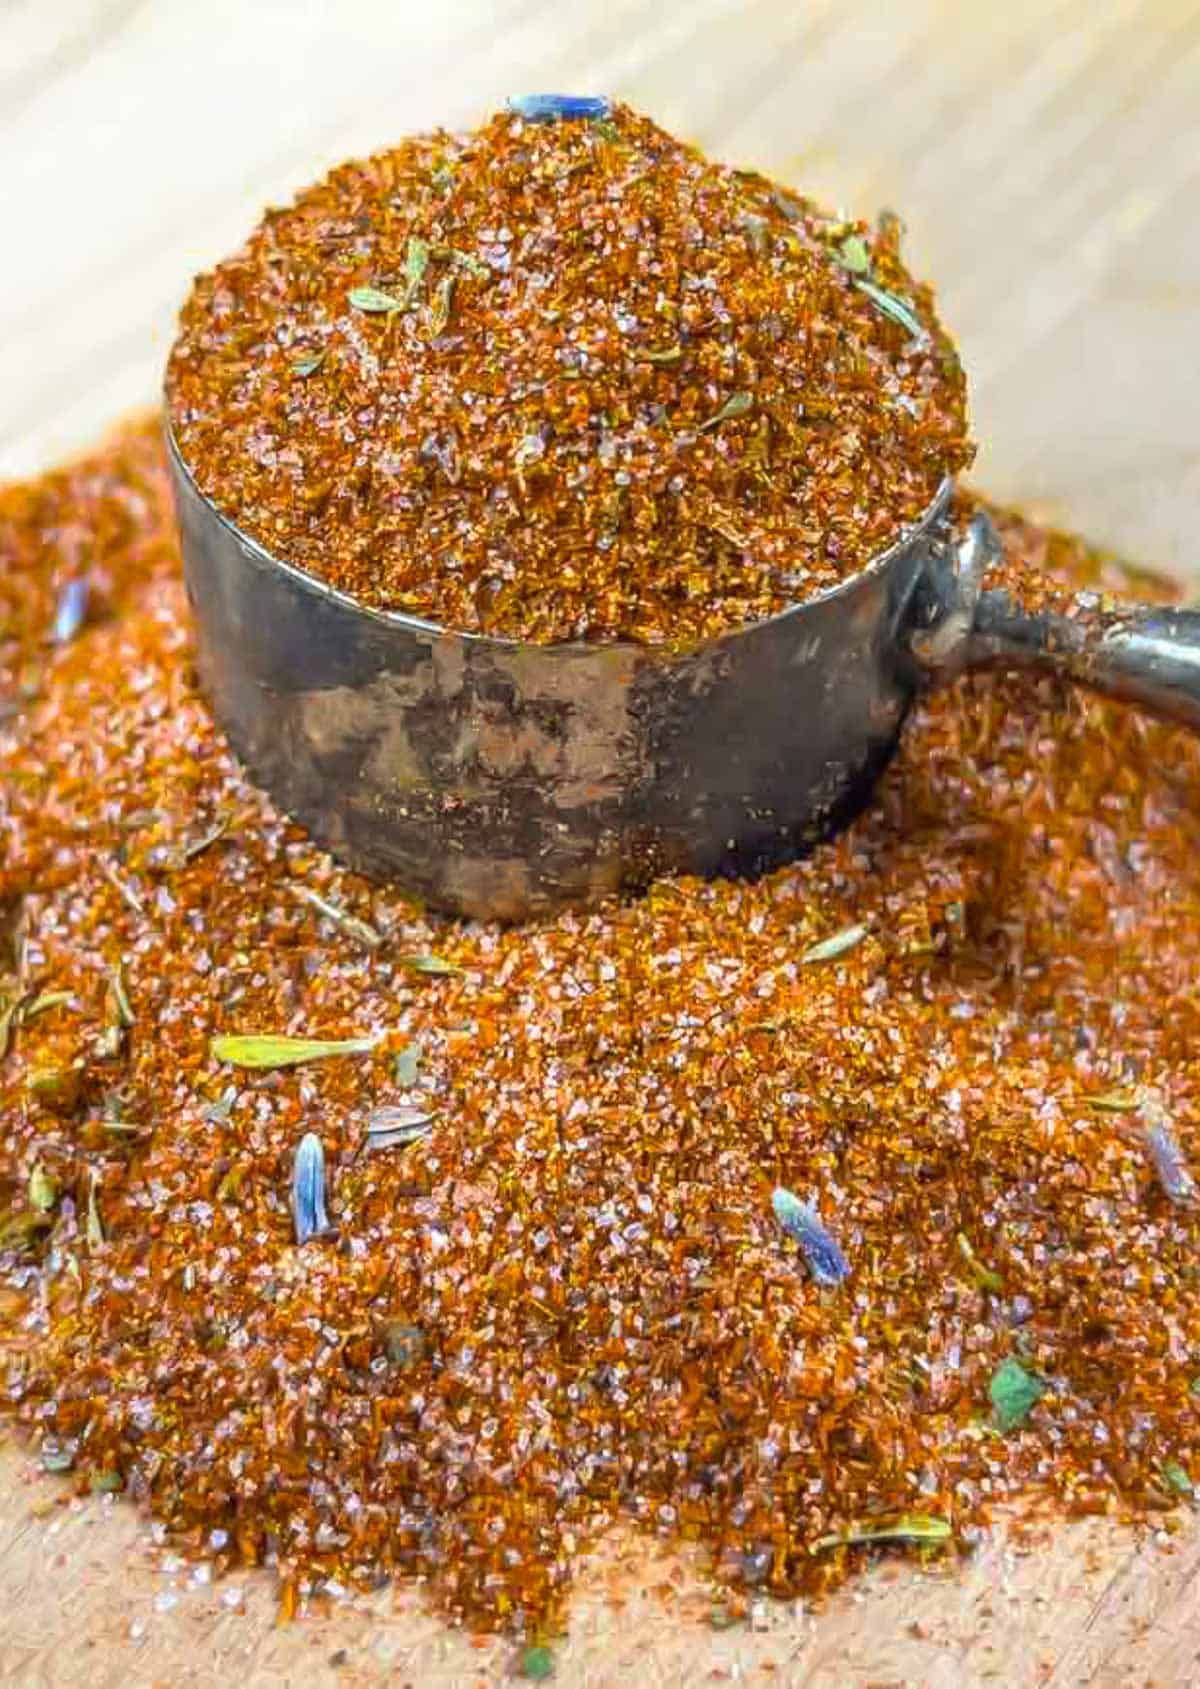 Pile of low-fodmap barbecue rub on a board with a scoop full of rub sitting on the pile.